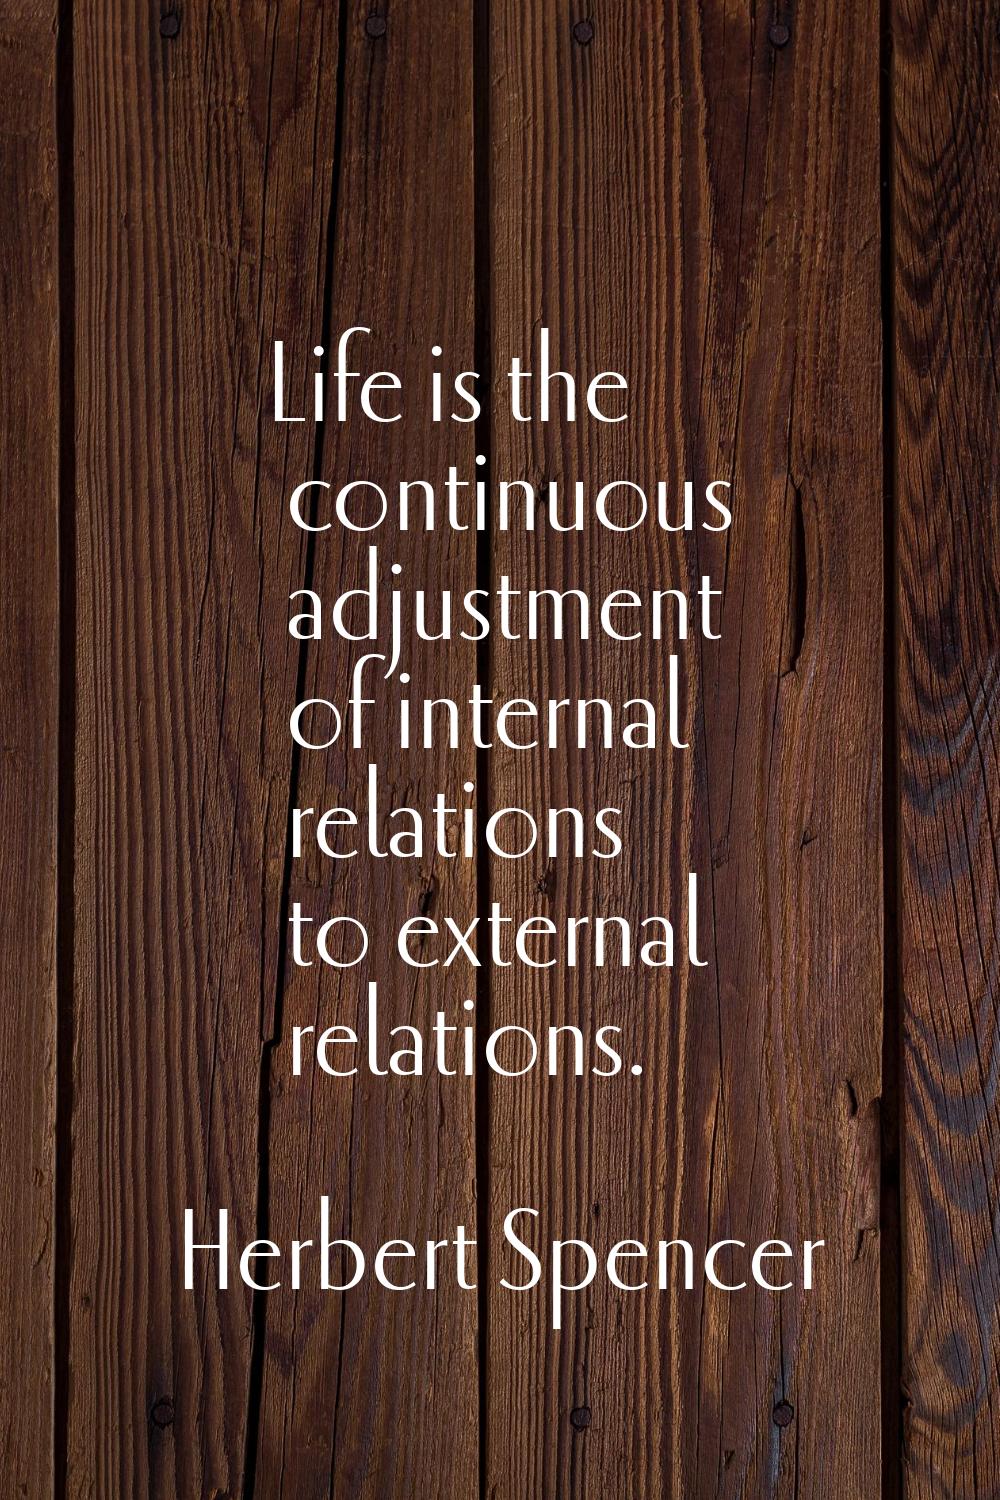 Life is the continuous adjustment of internal relations to external relations.